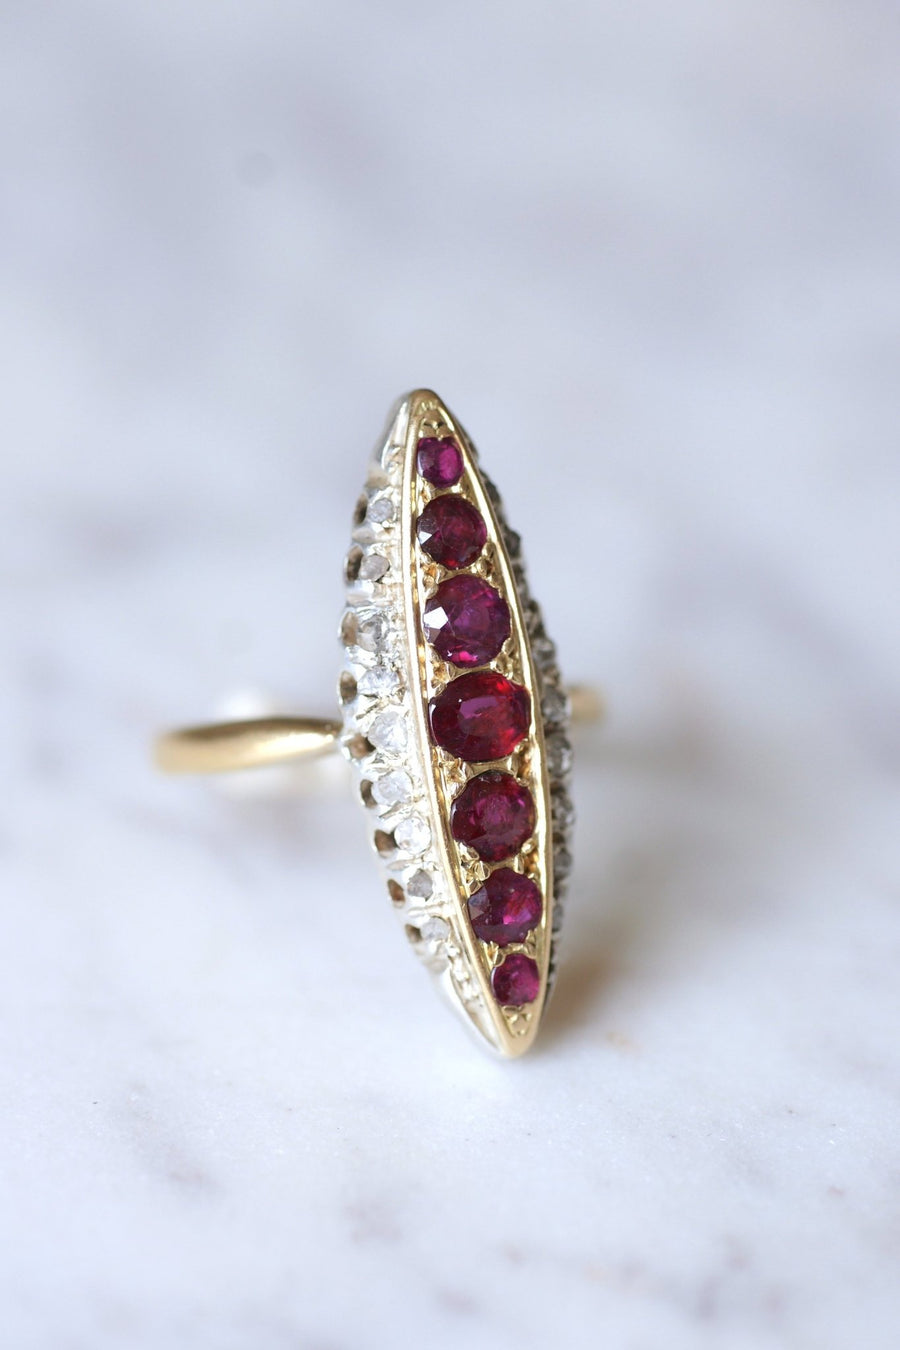 Marquise Victorian ring with diamonds and rubies in gold and silver - Galerie Pénélope